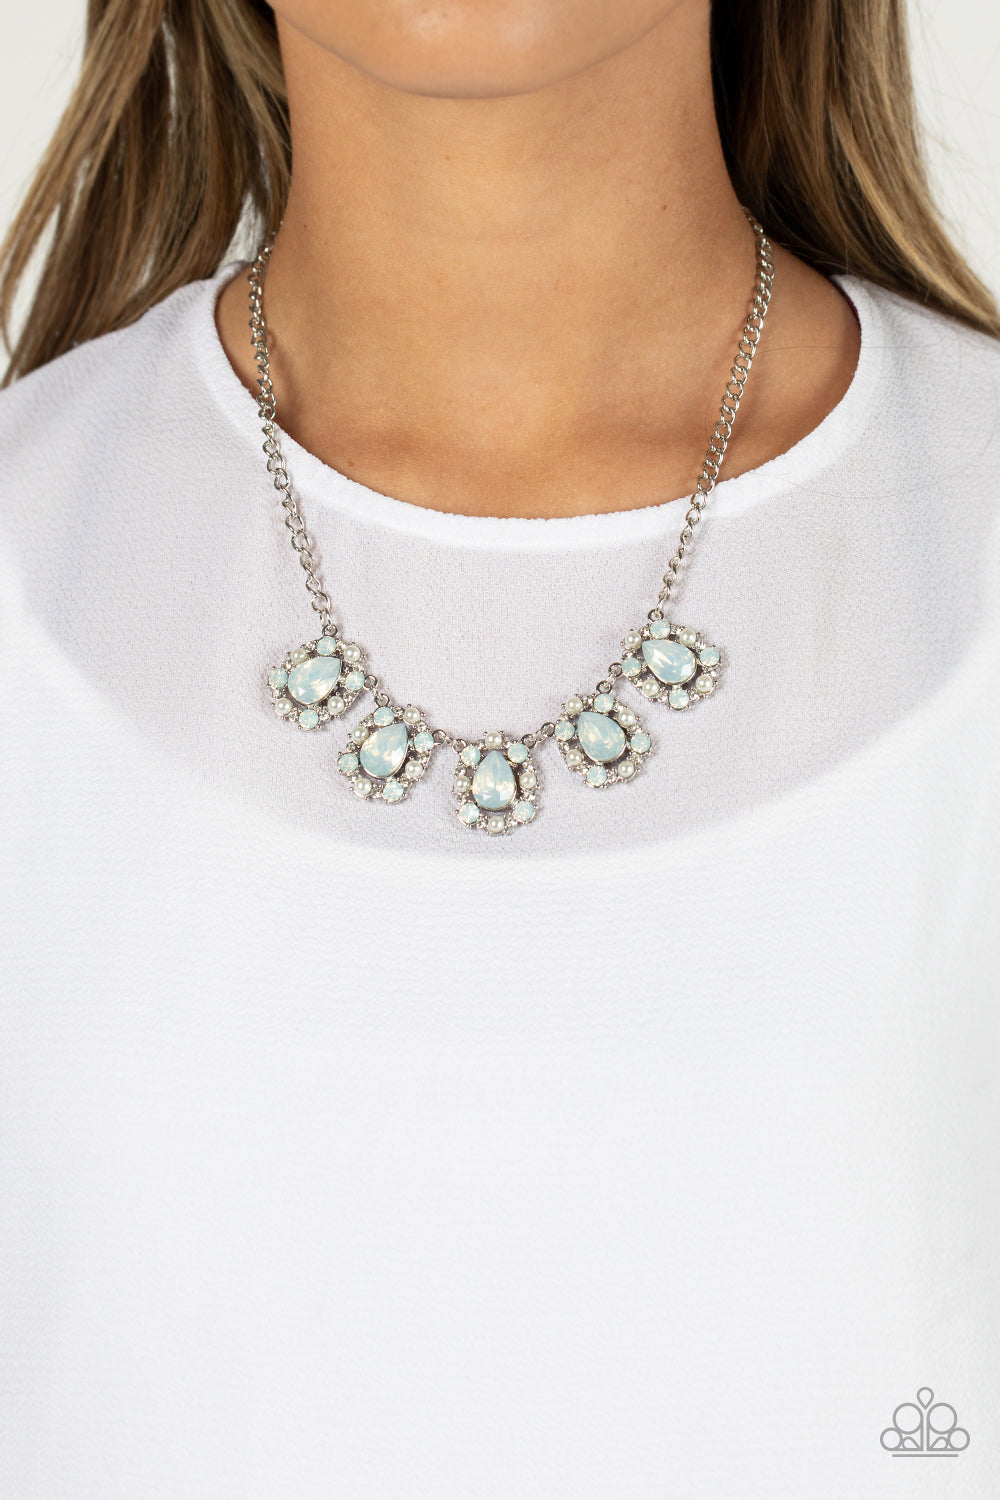 Paparazzi “Pearly Pond” White Necklace Earring Set